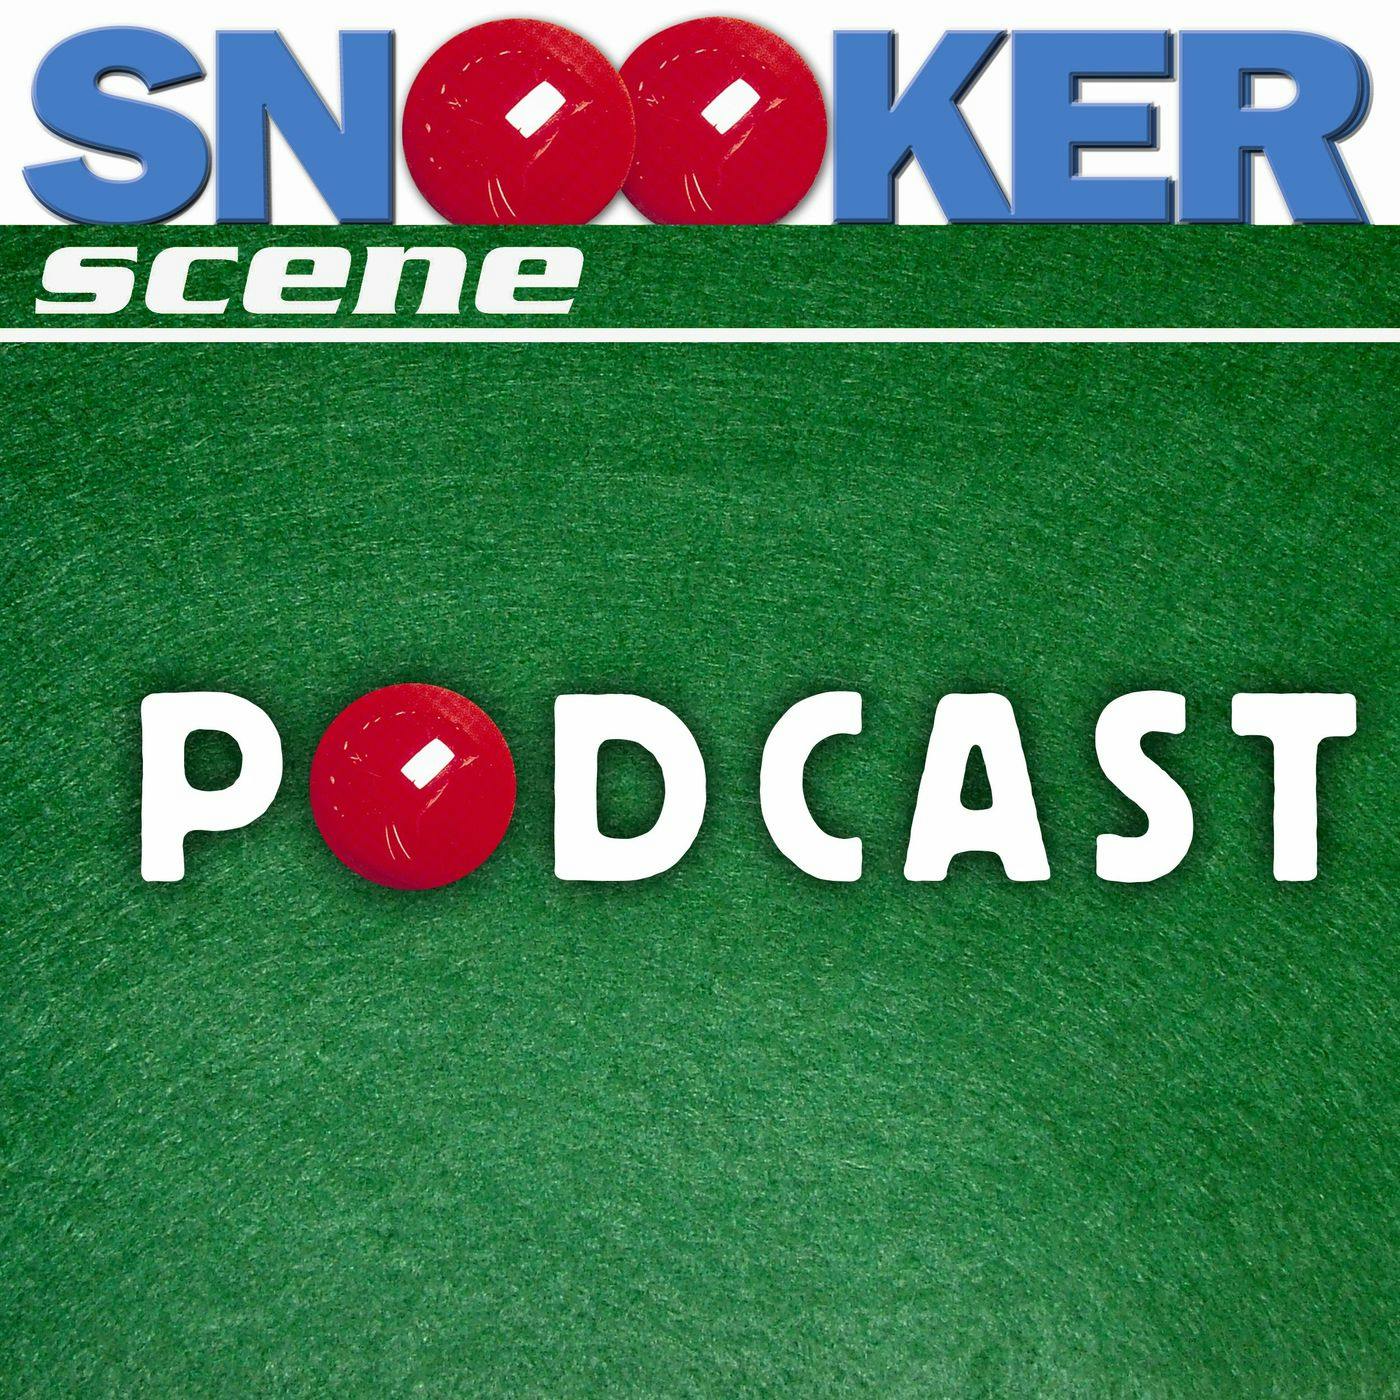 Snooker Scene Podcast episode 163 - The Big Quiz and Wayne Griffiths